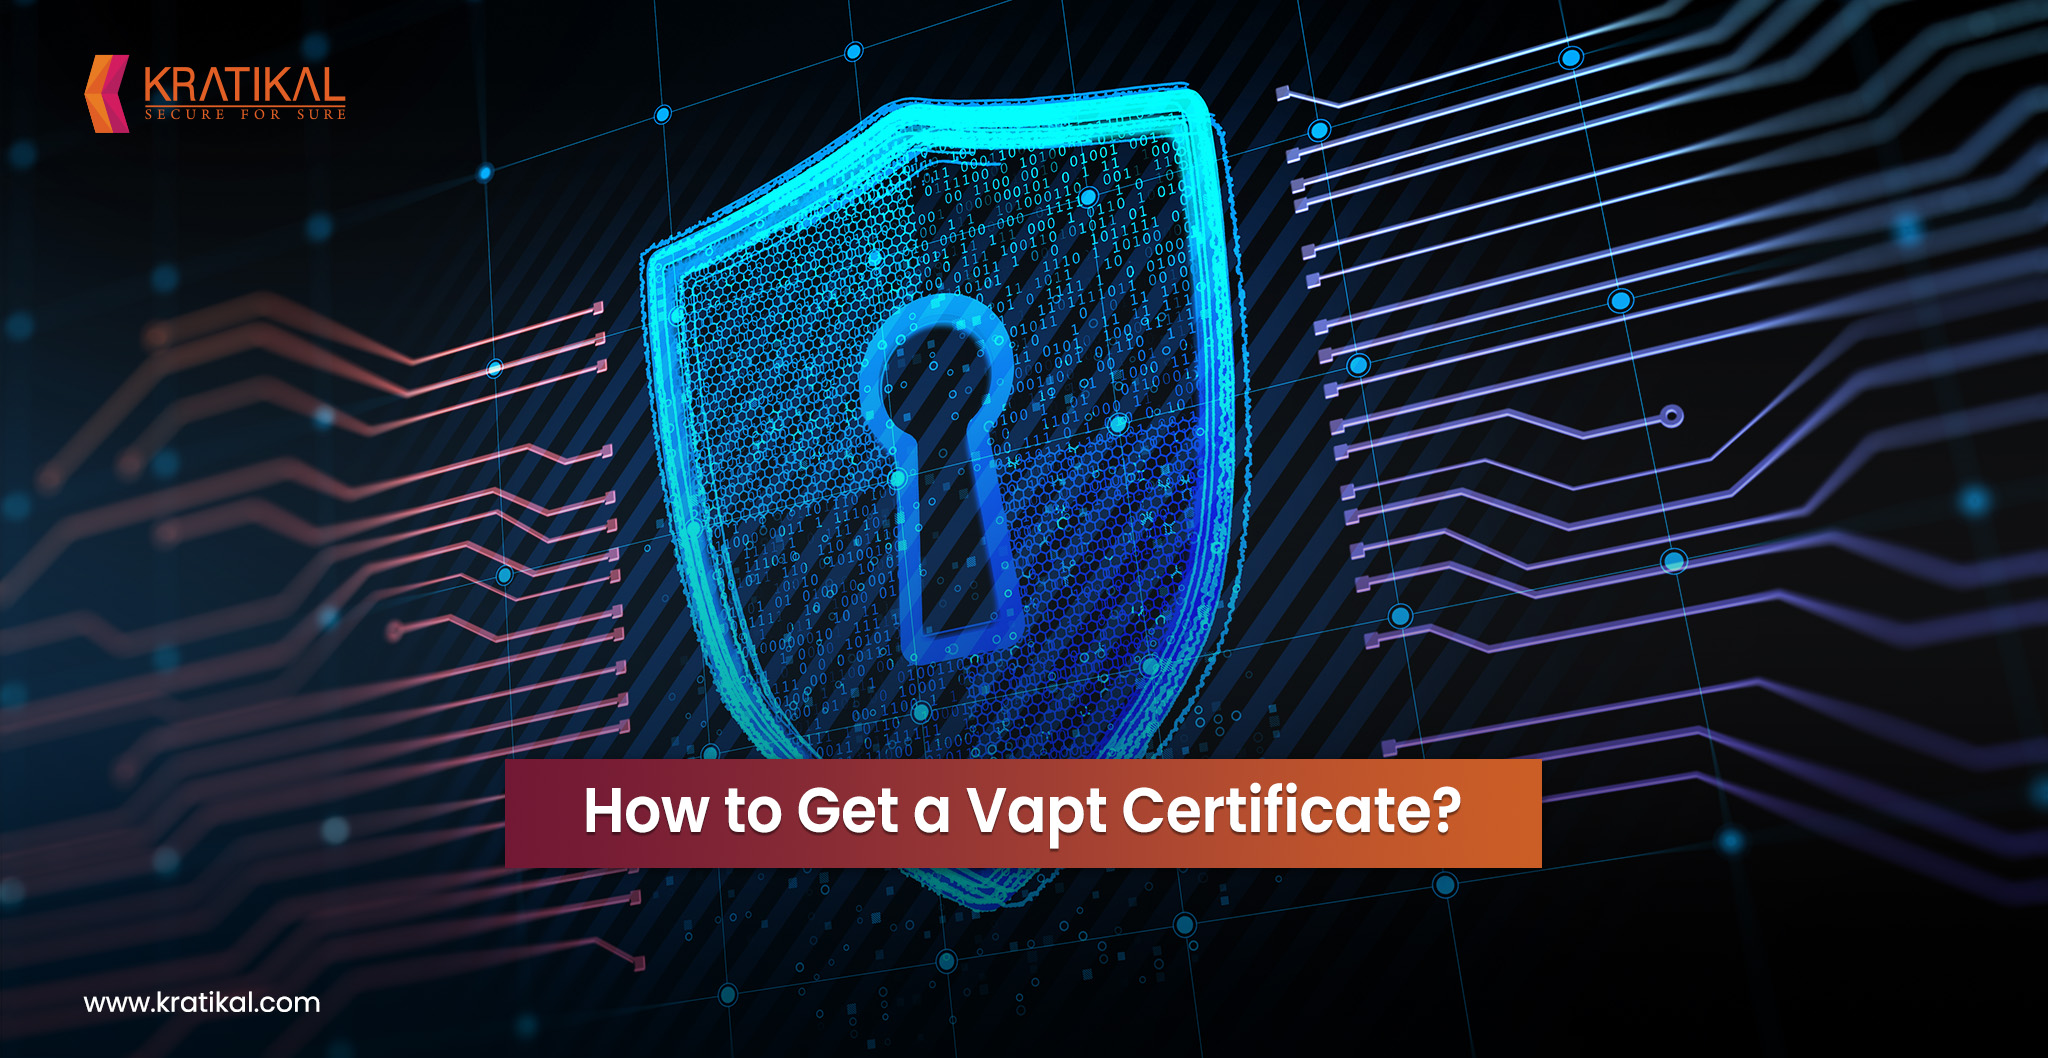 How to Get a Vapt Certificate?